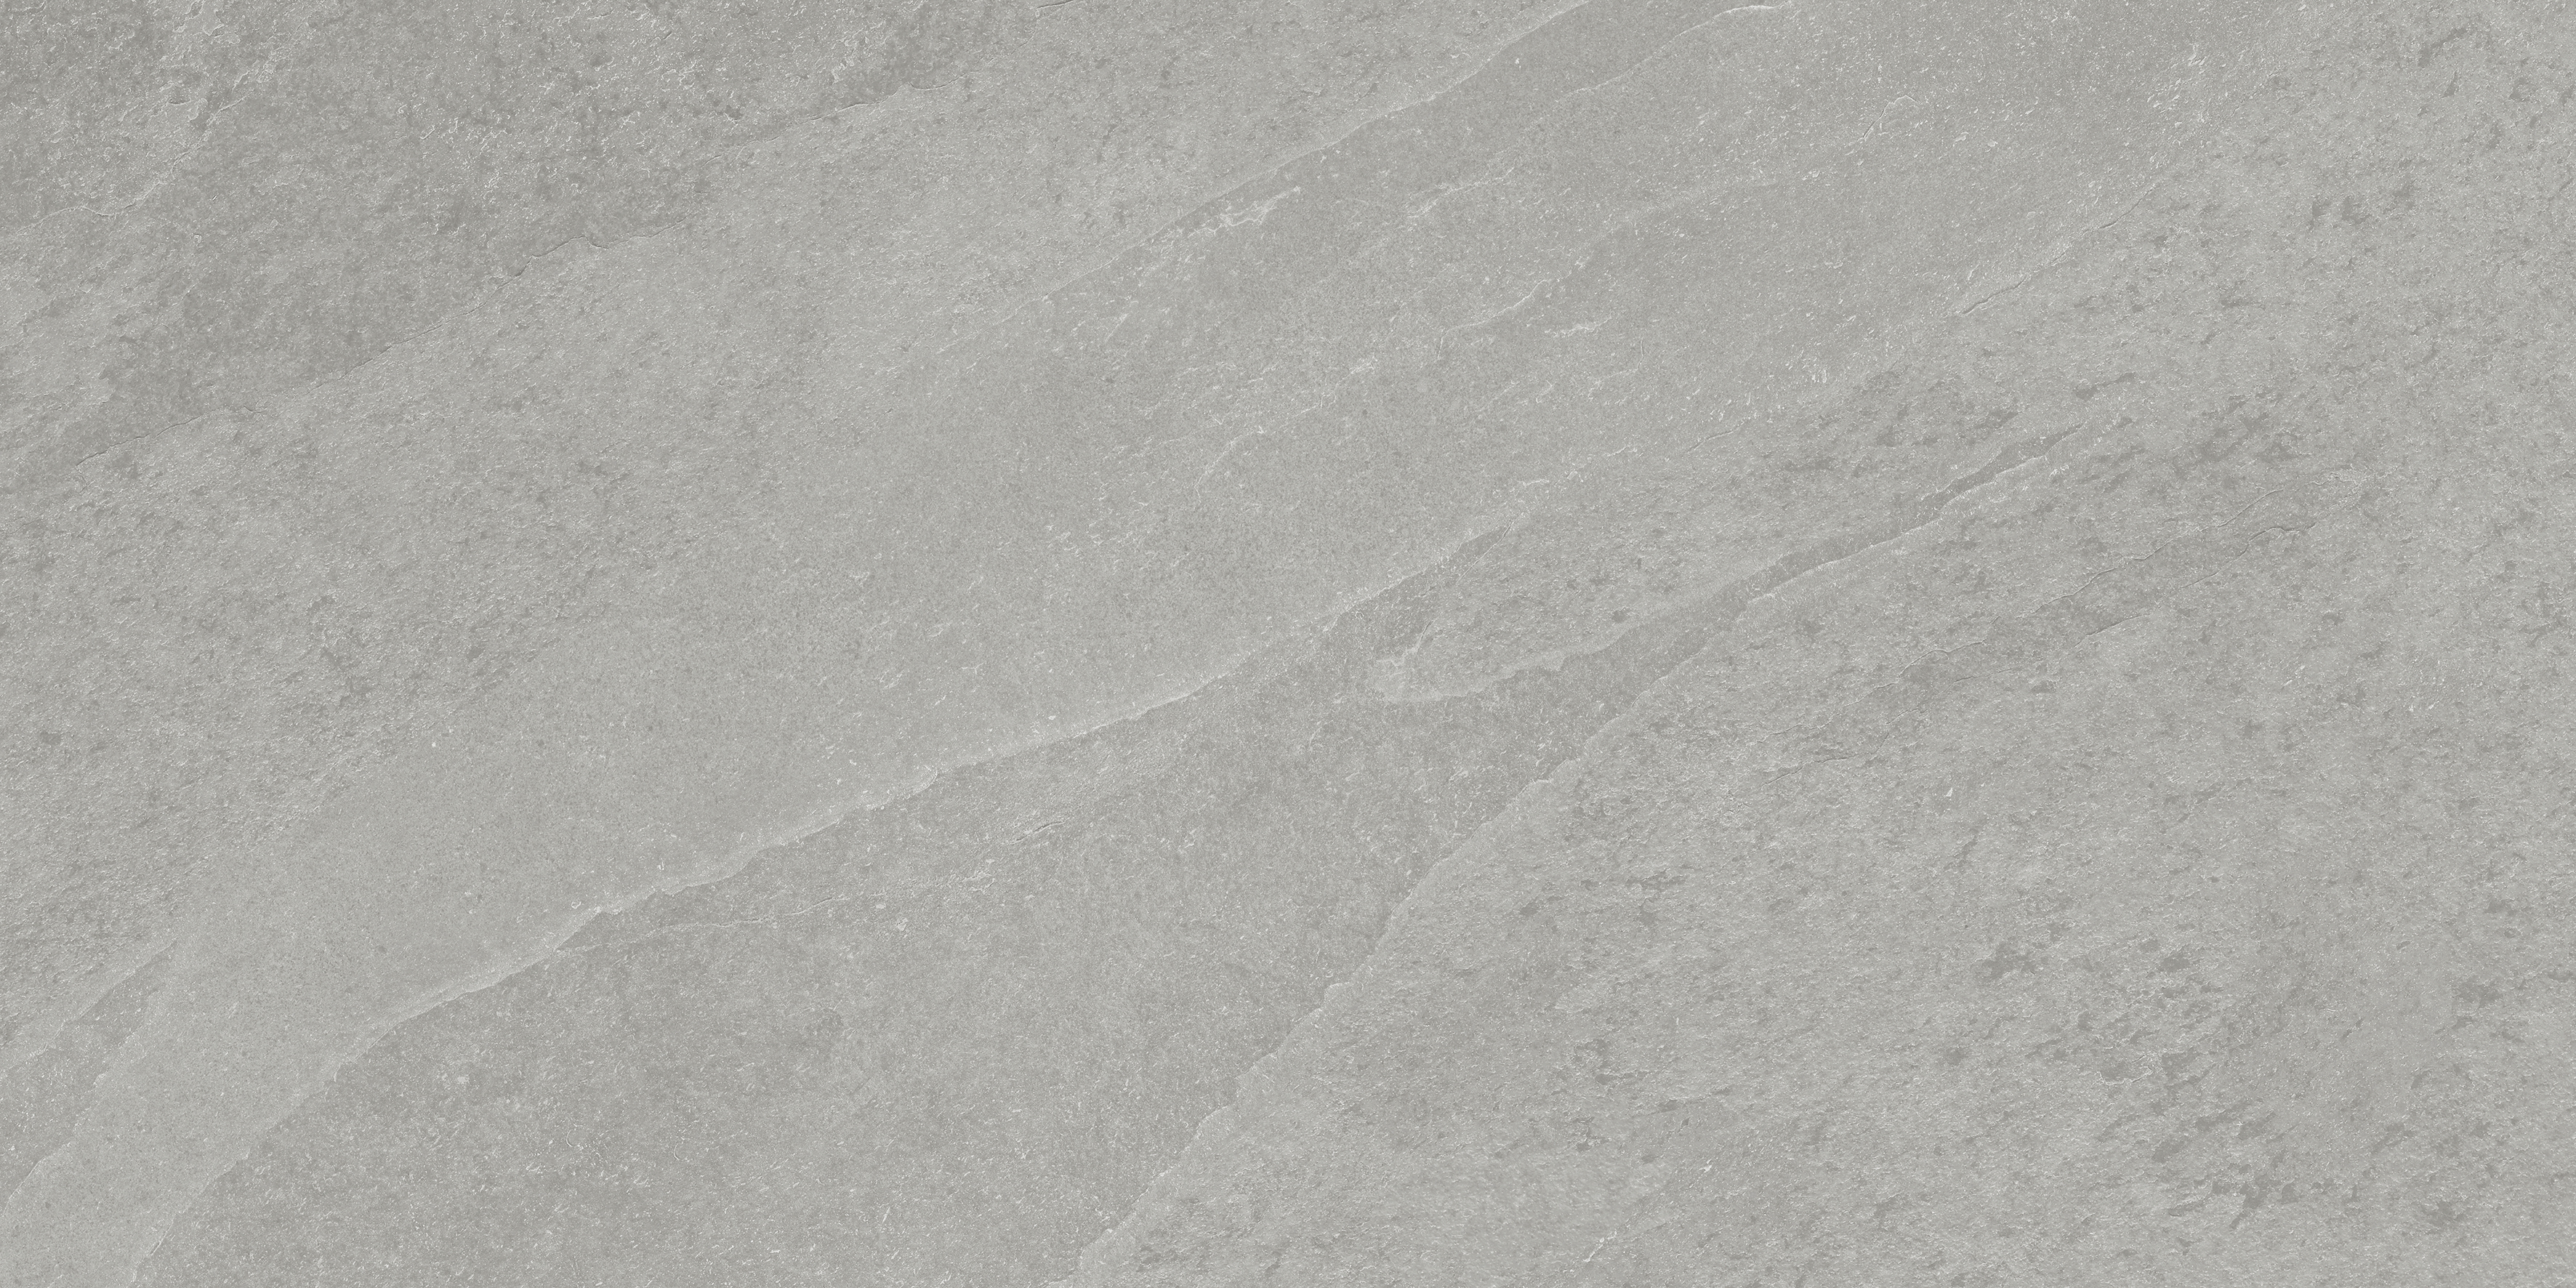 palladium pattern color body porcelain field tile from nord anatolia collection distributed by surface group international matte finish rectified edge 12x24 rectangle shape